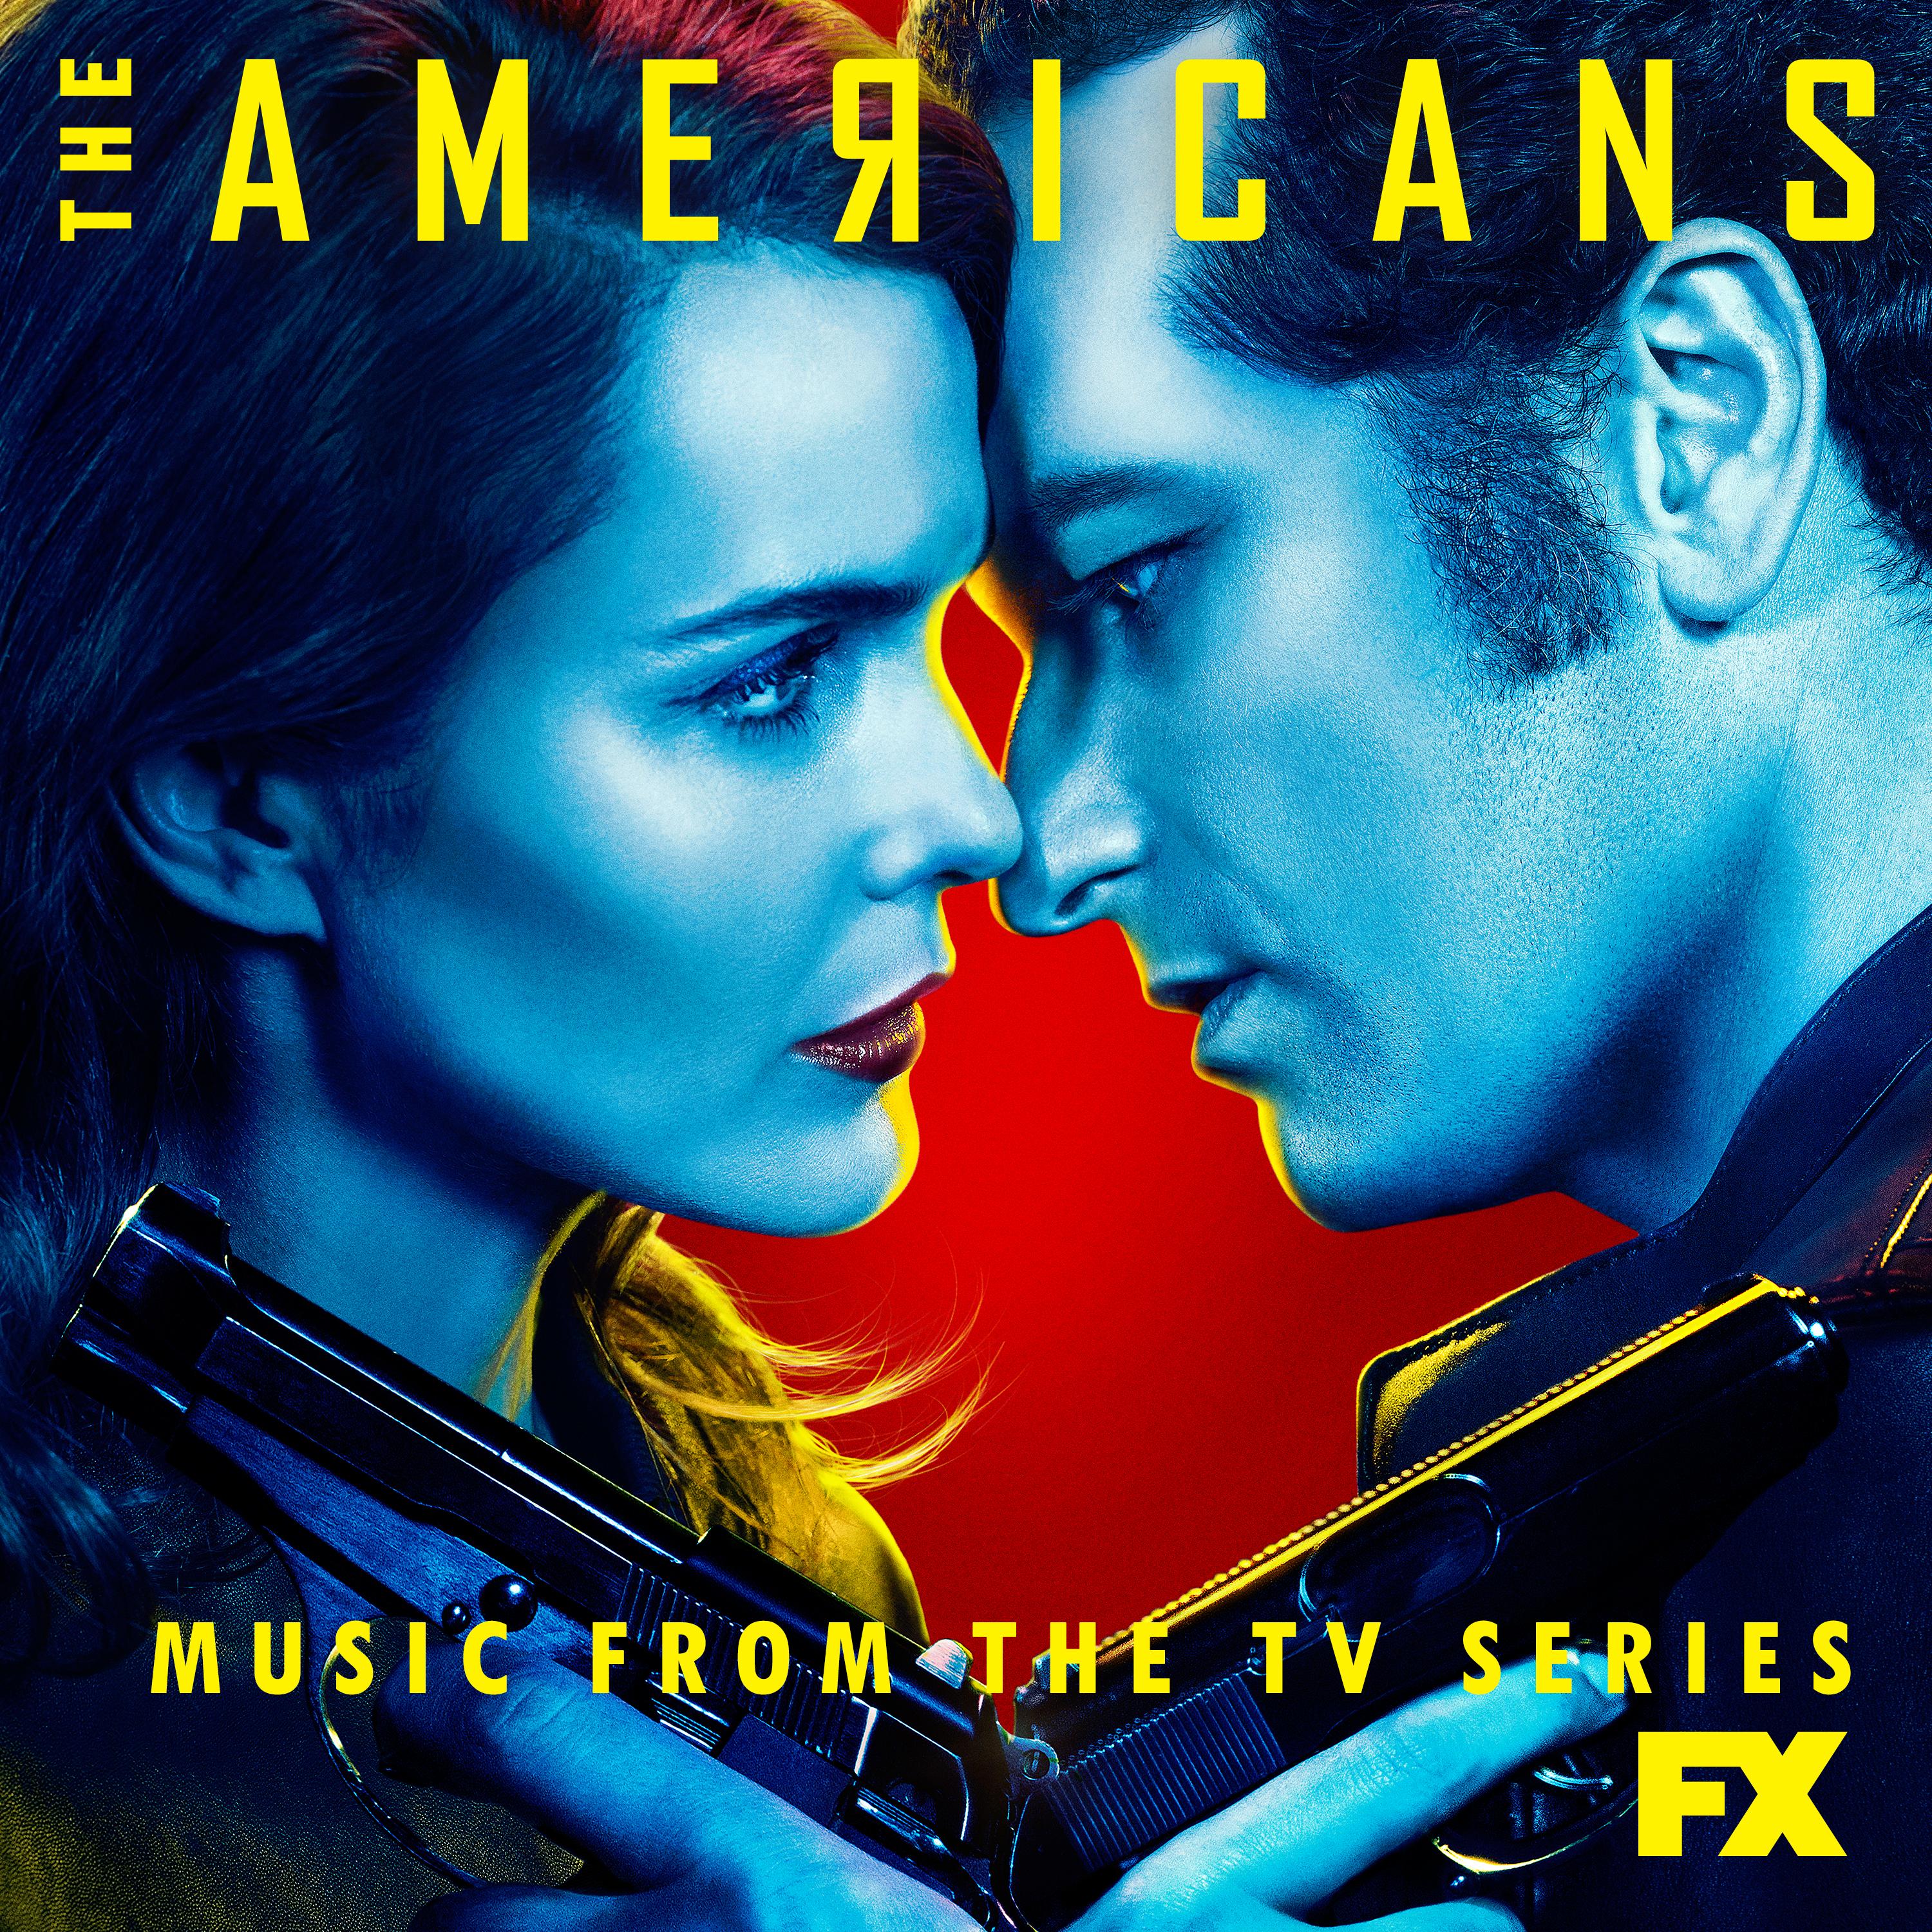 The Americans: Music from the TV Series